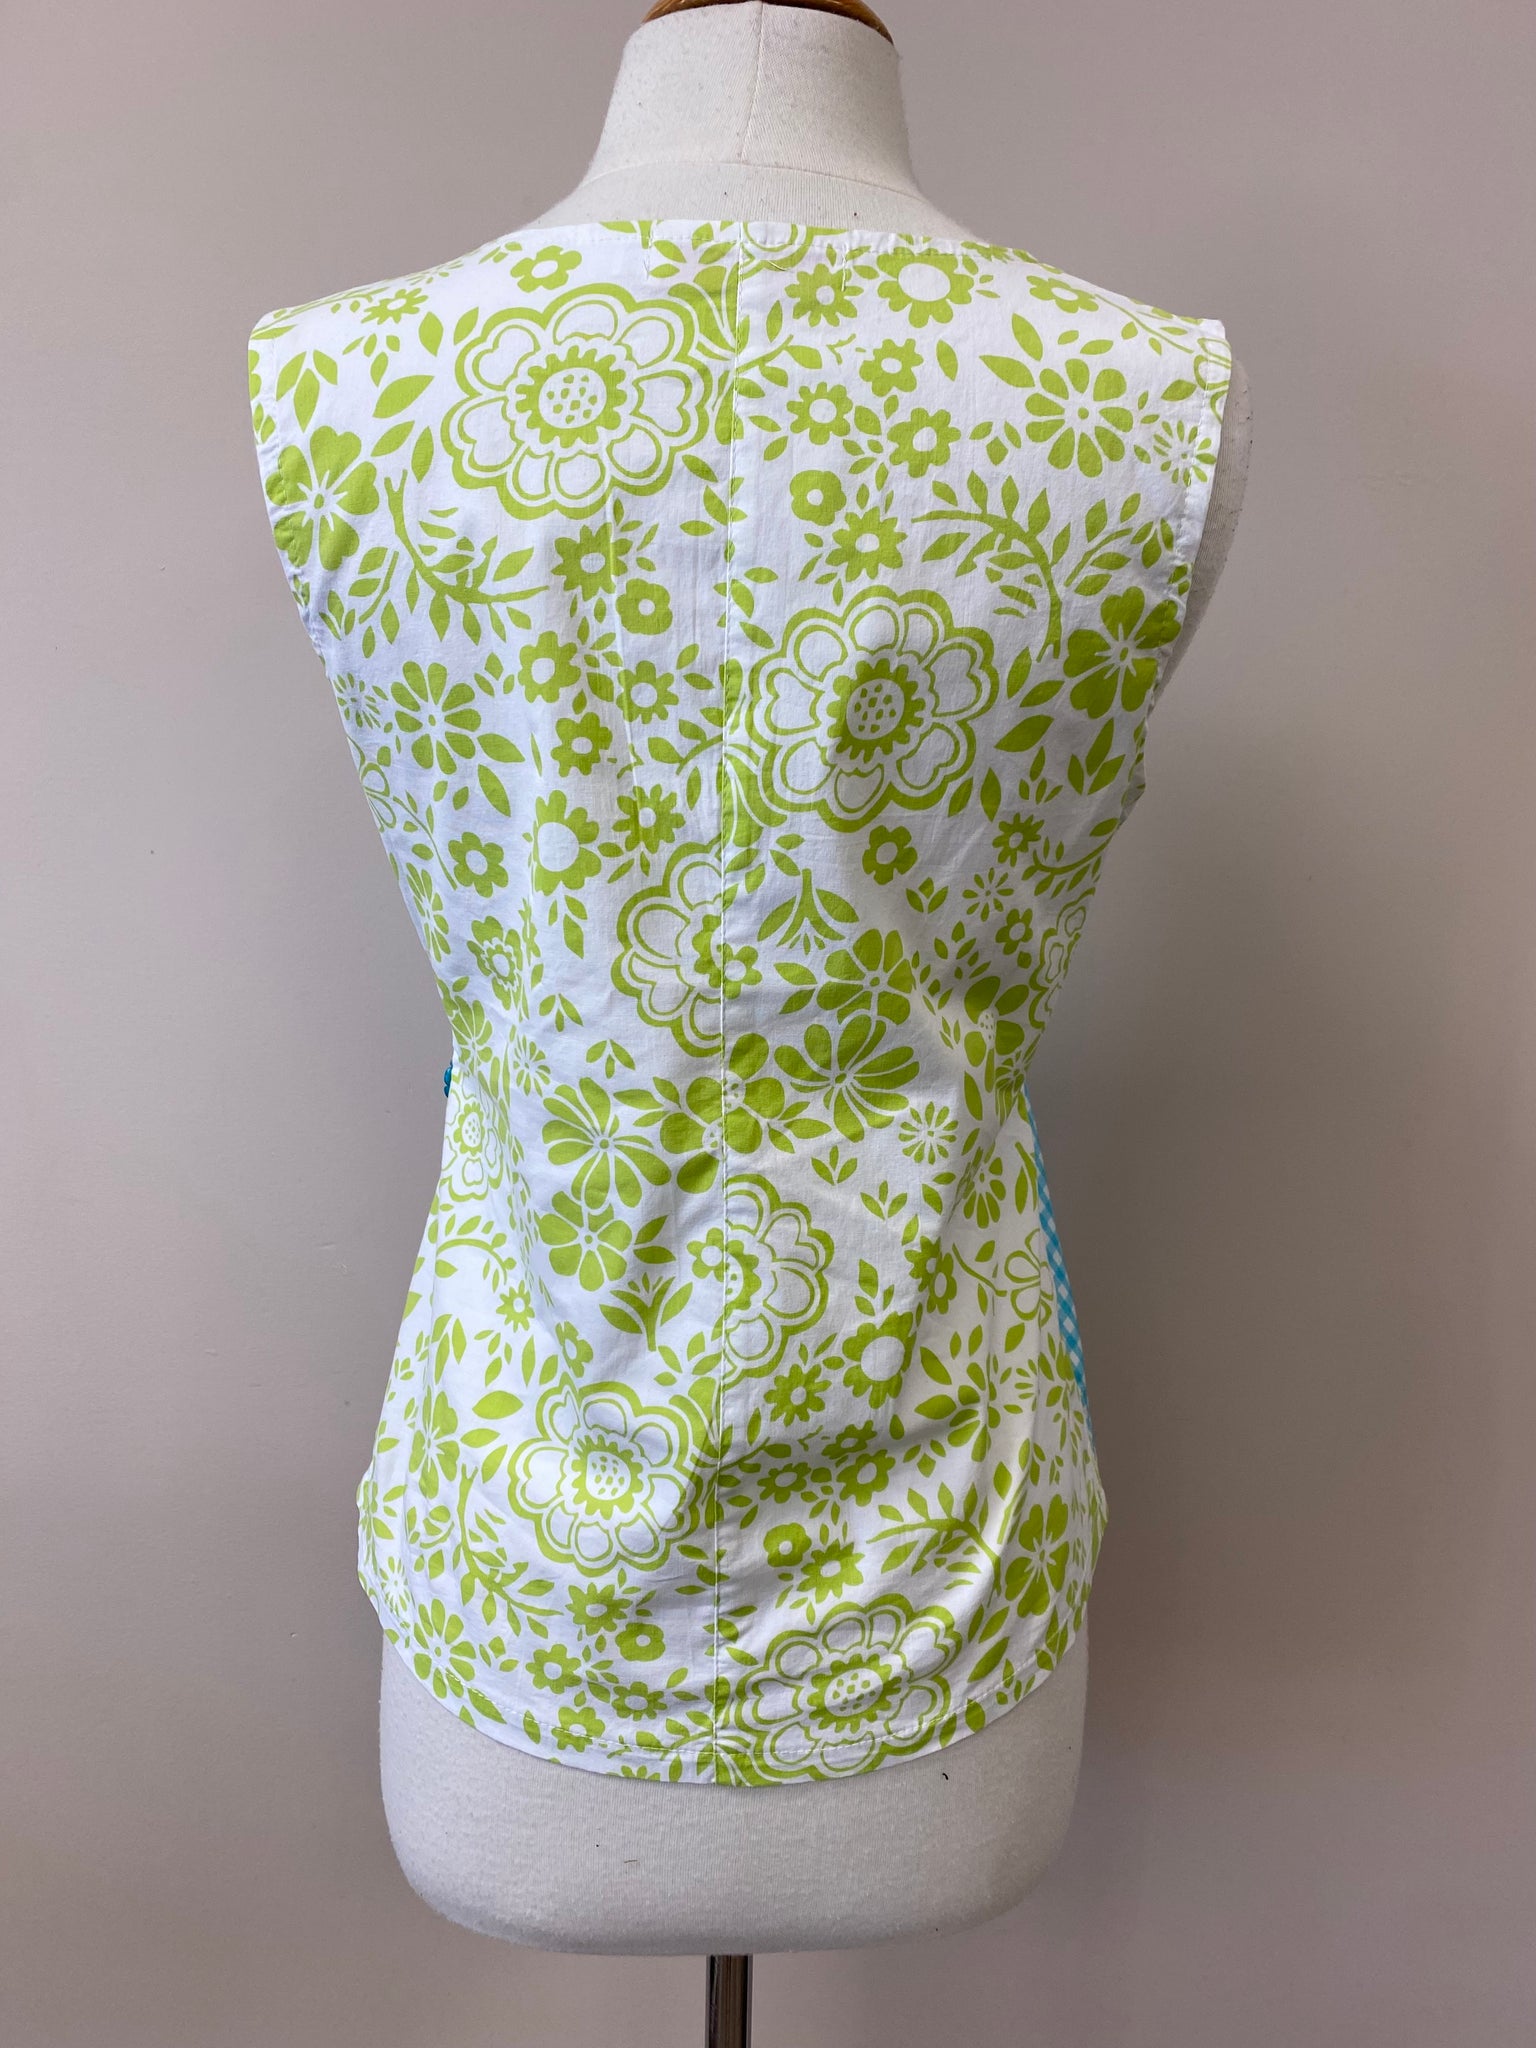 Crossover Tank {VINTAGE COLLECTION} citrus floral